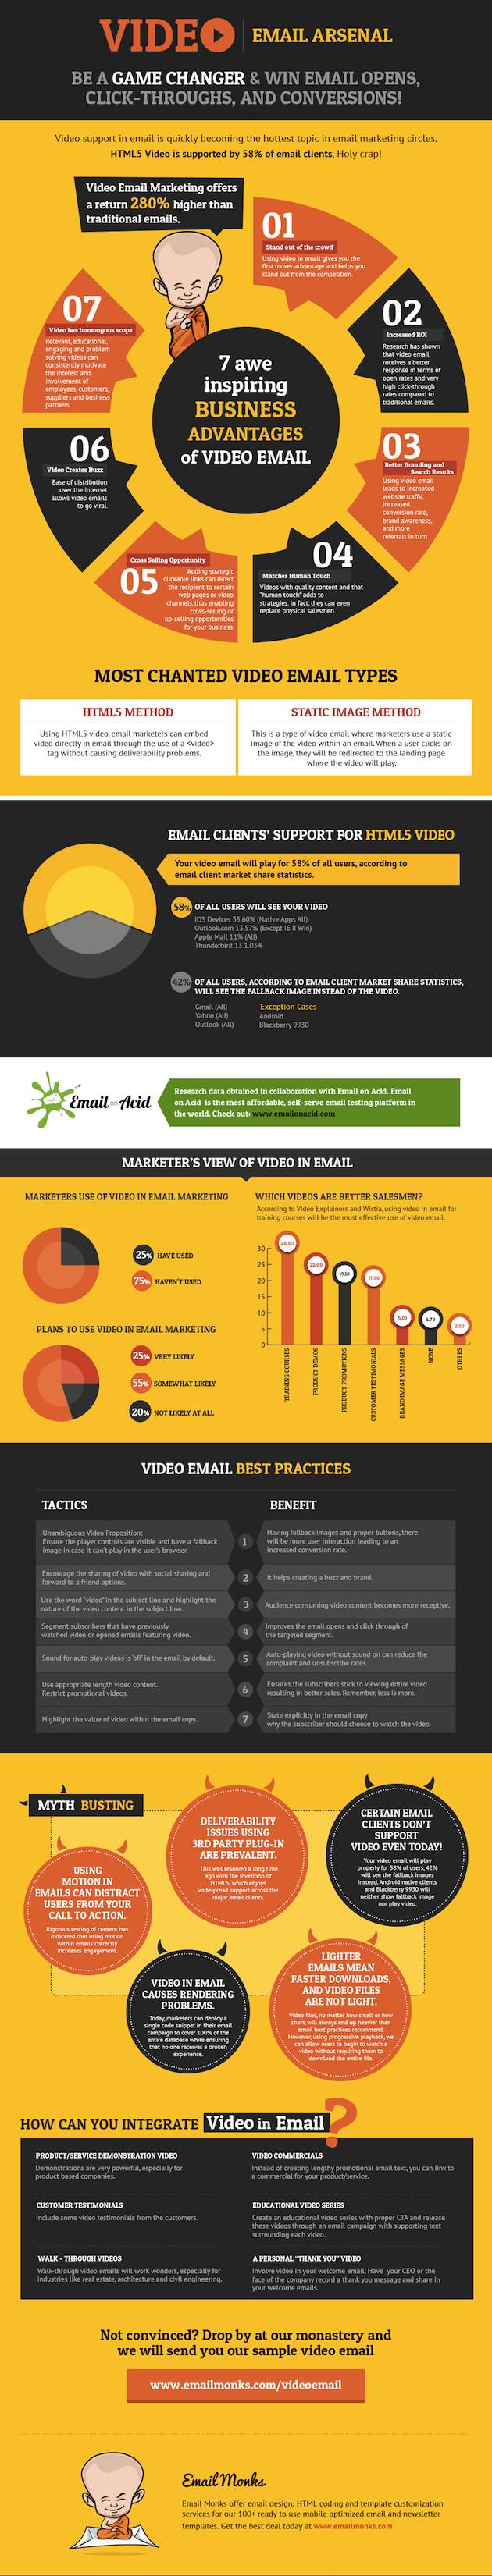 email-video-infographic-2013